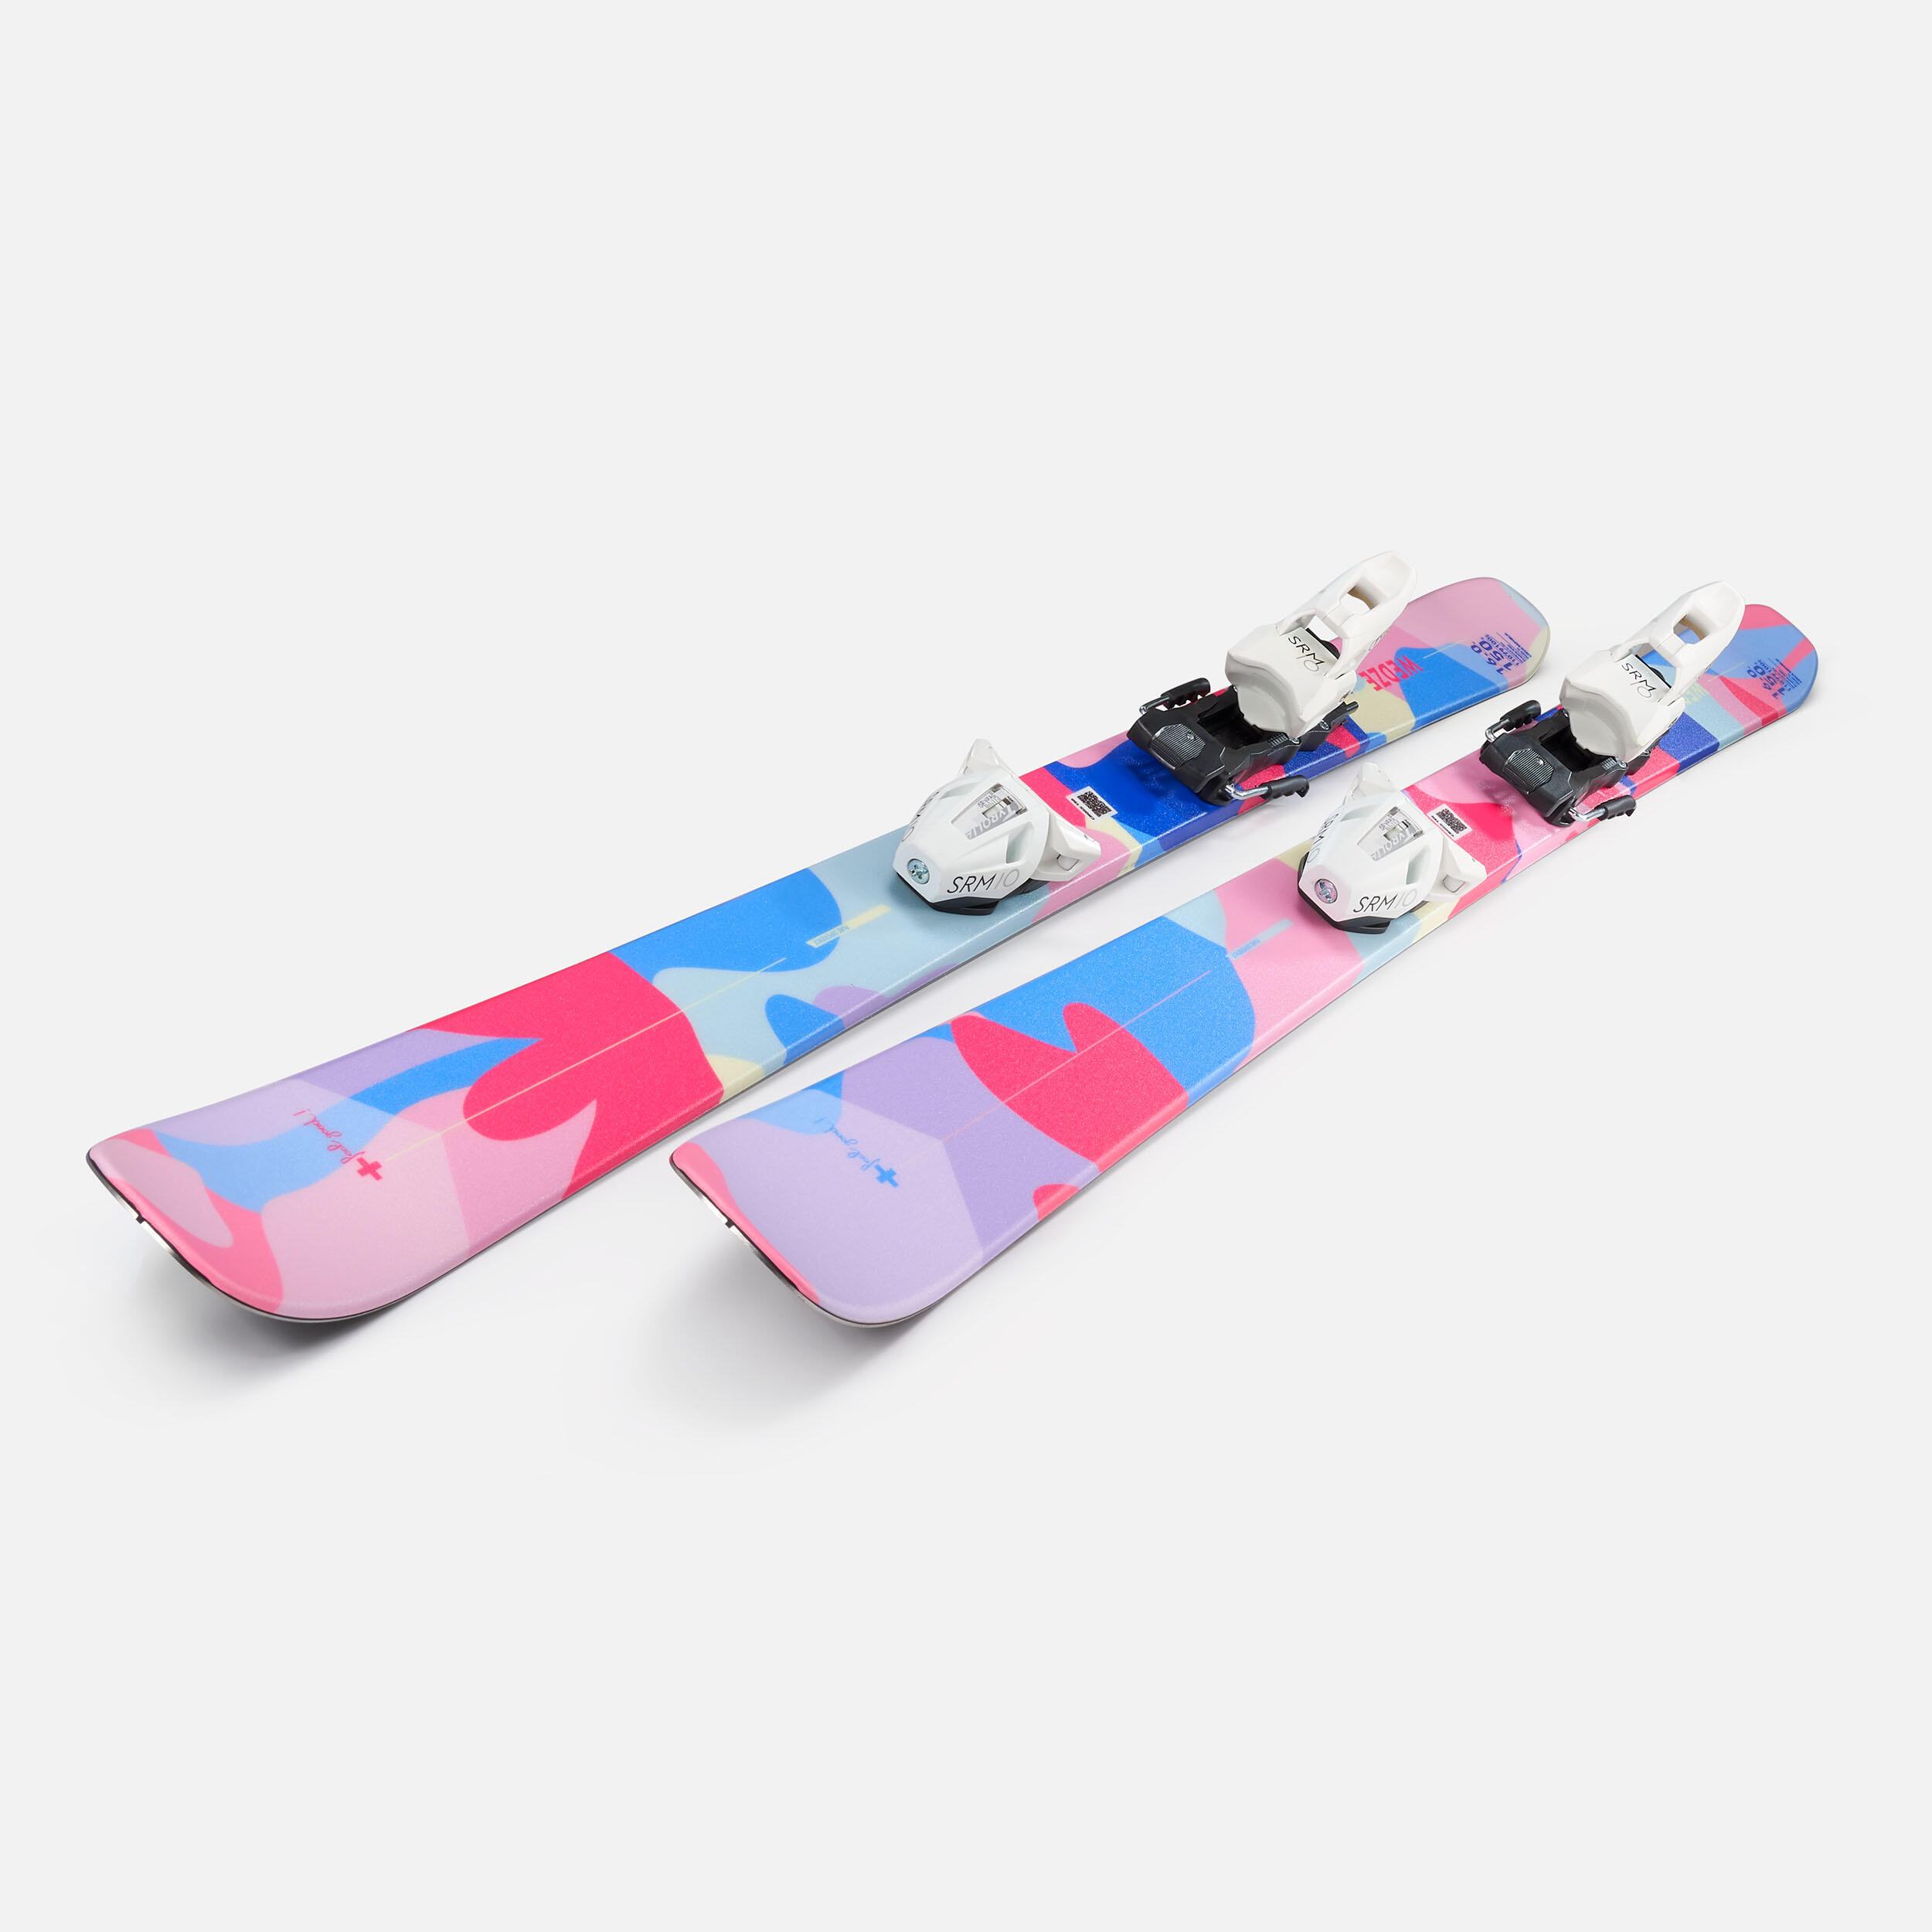 WOMEN'S DOWNHILL SKI WITH BINDINGS - CROSS 150+ FLORAL 10/12